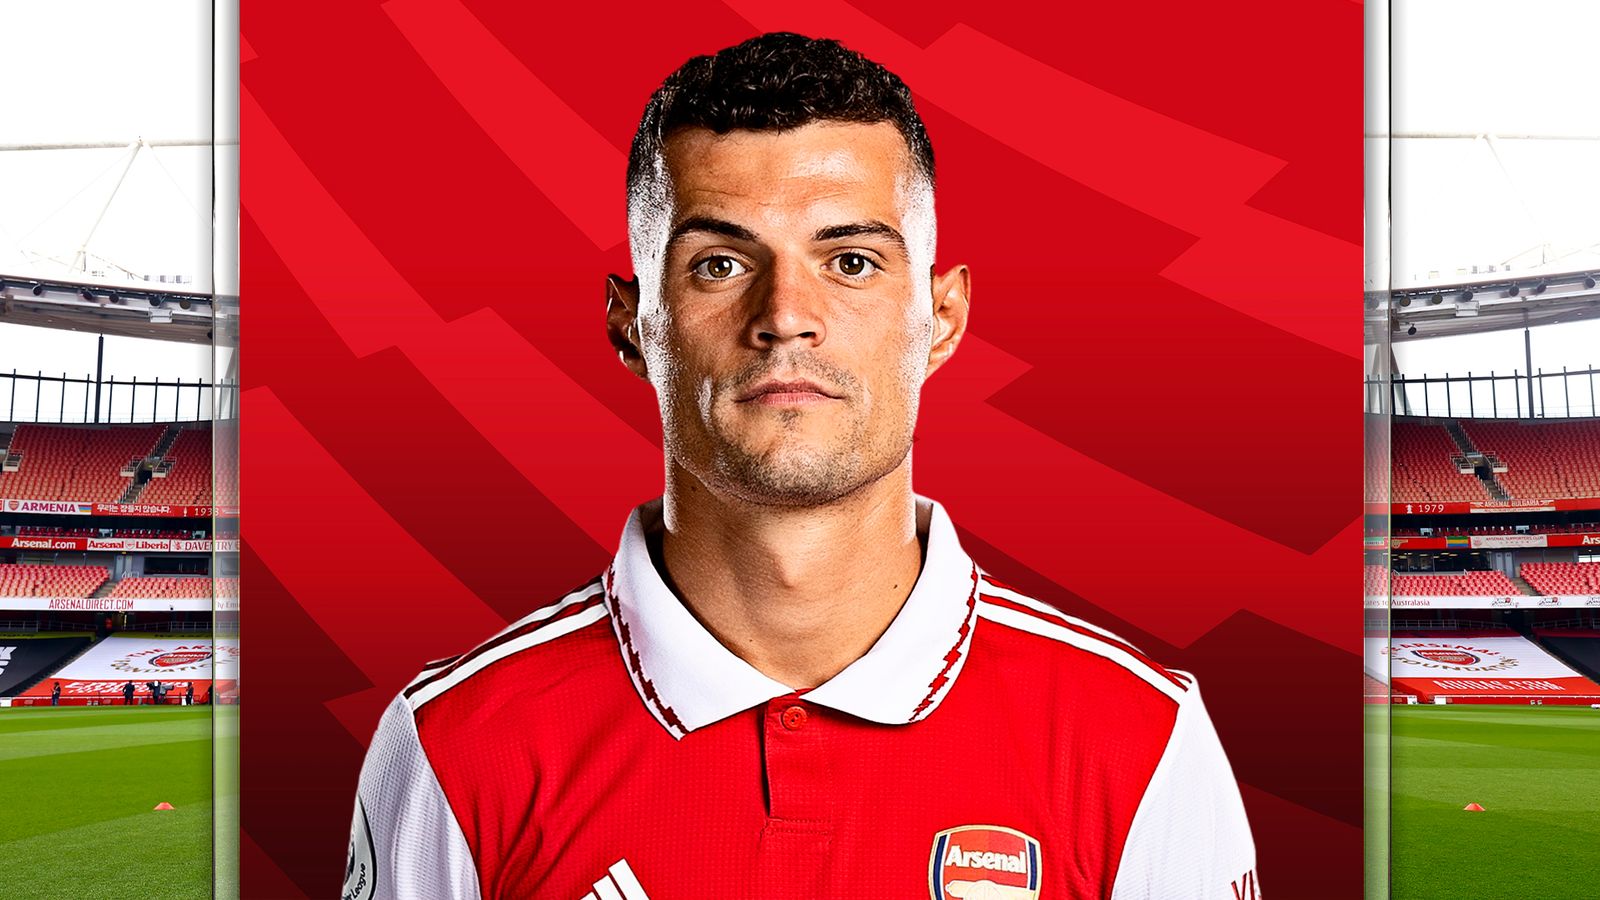 granit-xhaka-thriving-for-arsenal-after-reinvention-as-an-attacking-midfielder-under-manager-mikel-arteta